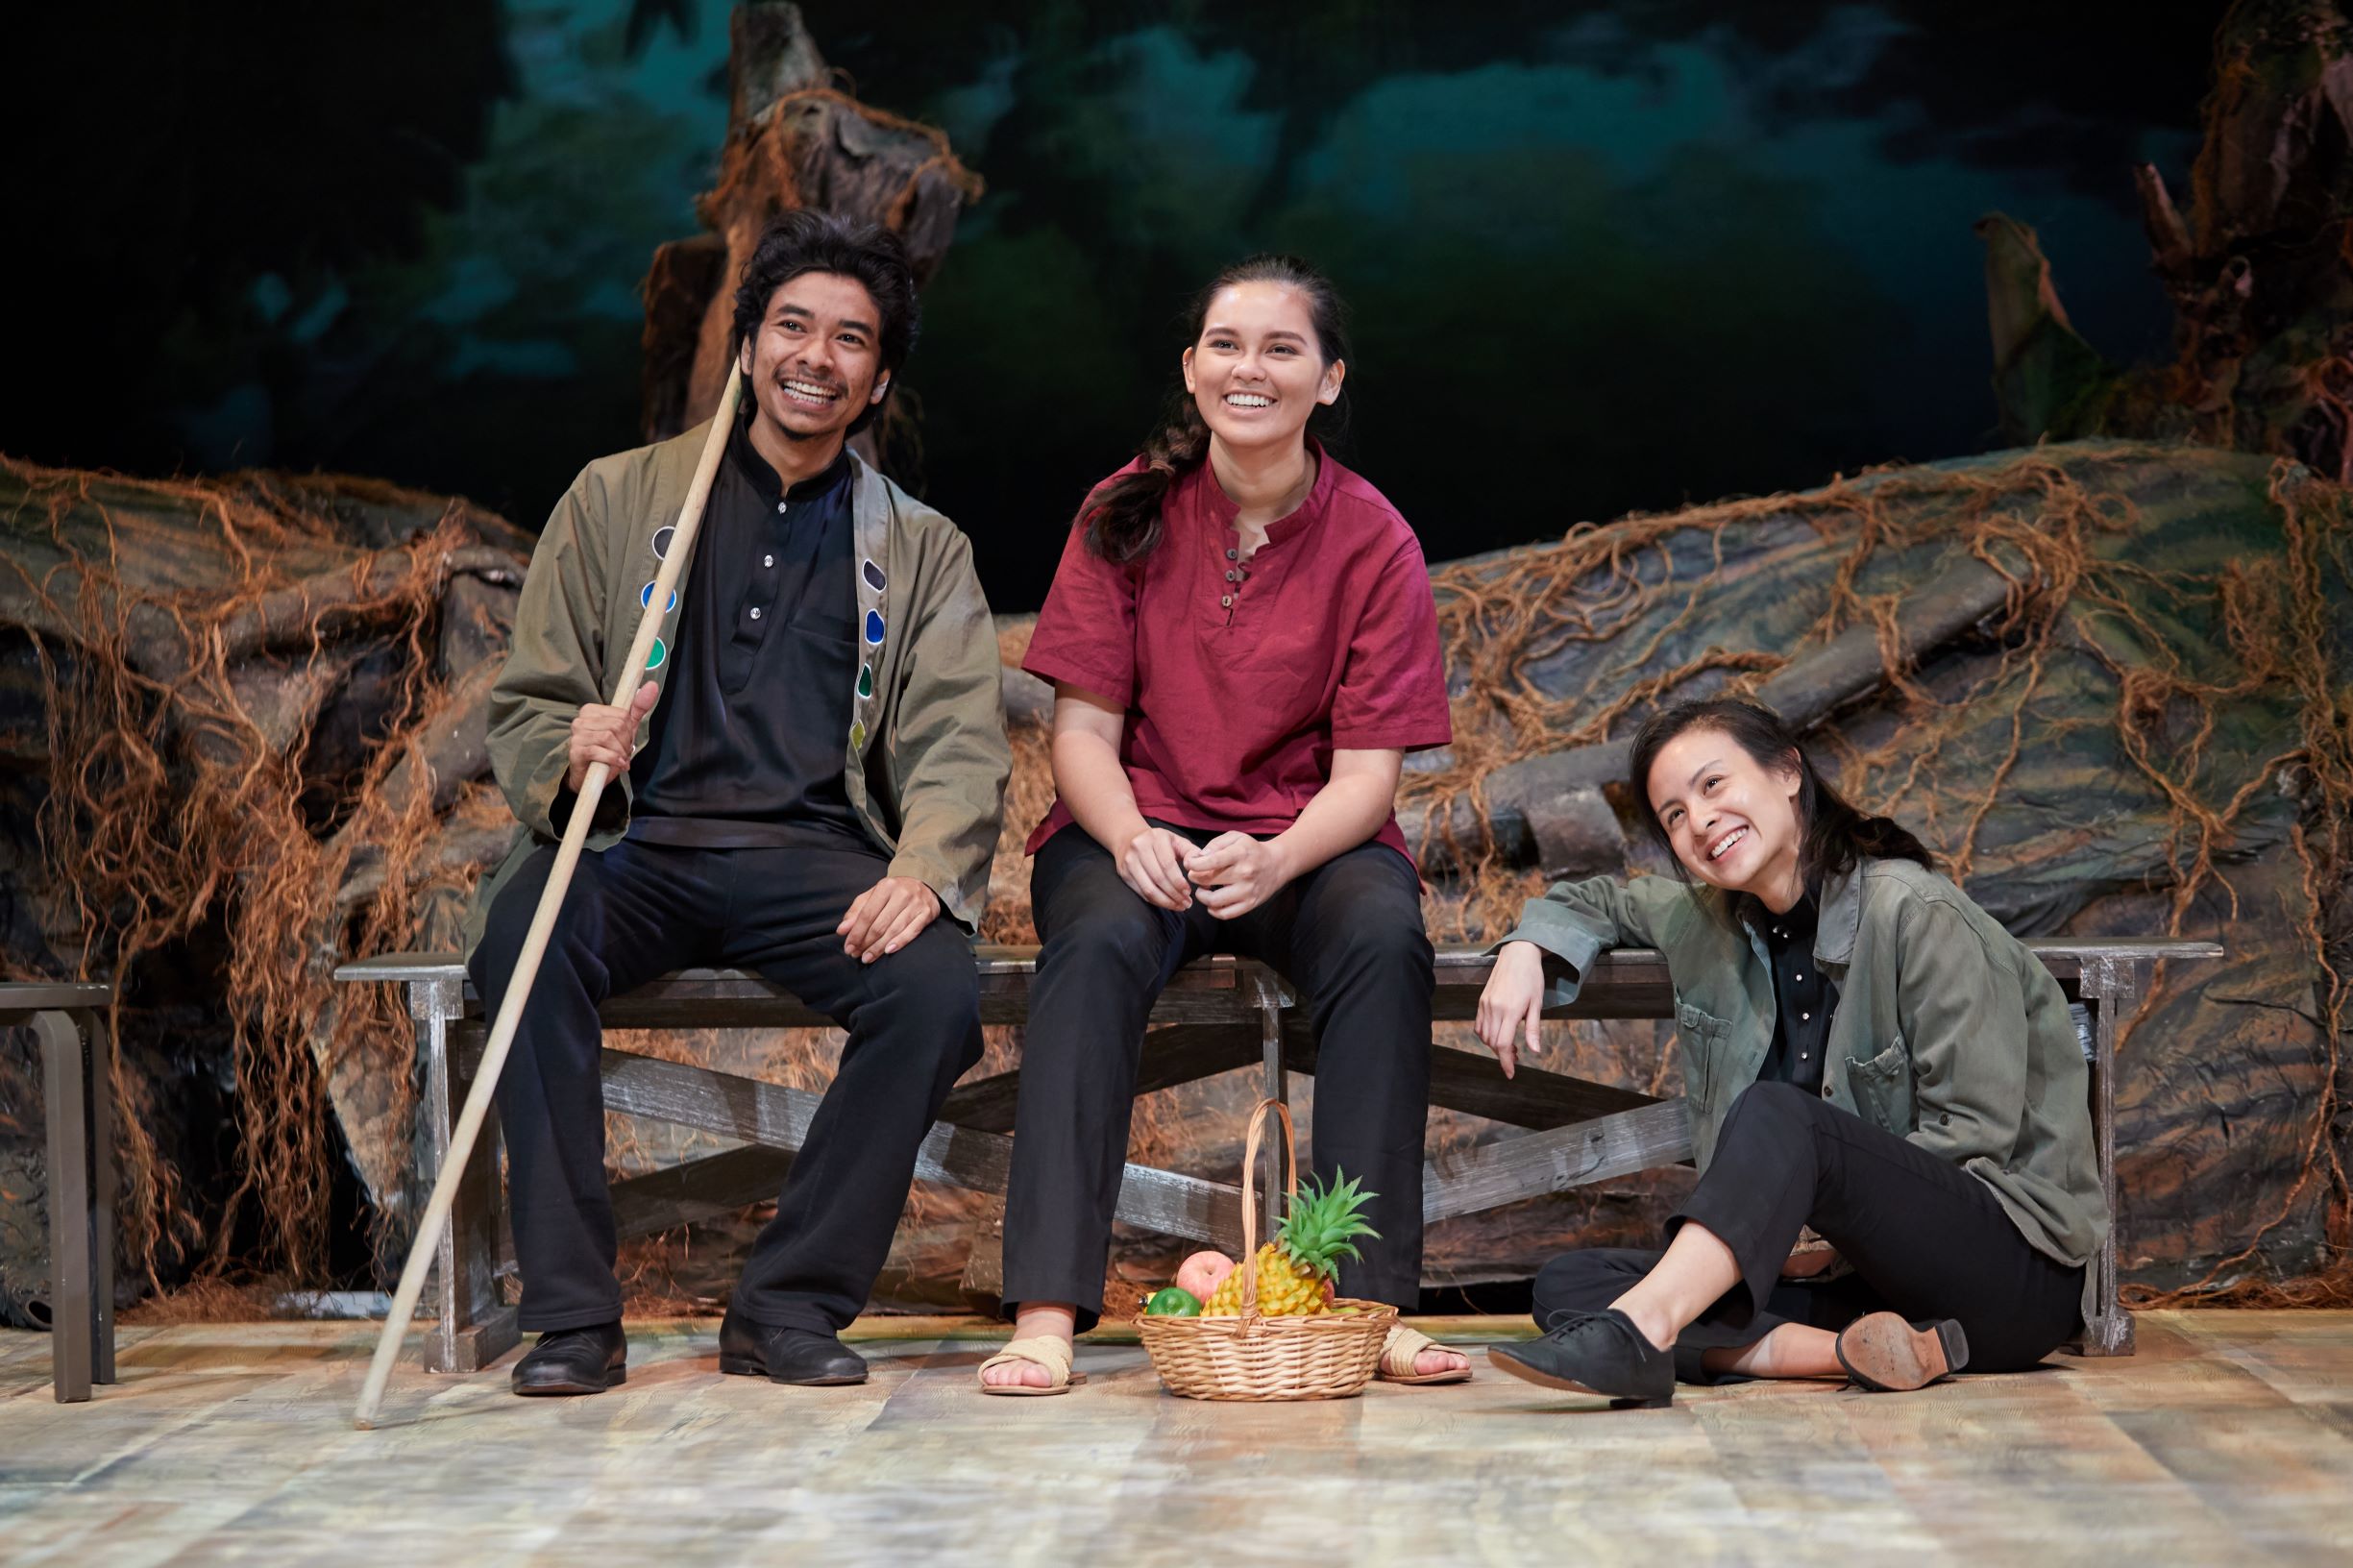  William Shakespeare’s As You Like It  As Duke Frederick and Senior  Dir. Michael Earley  Performed at LASALLE College of the Arts &amp; Gateway Theatre, Singapore  2019 